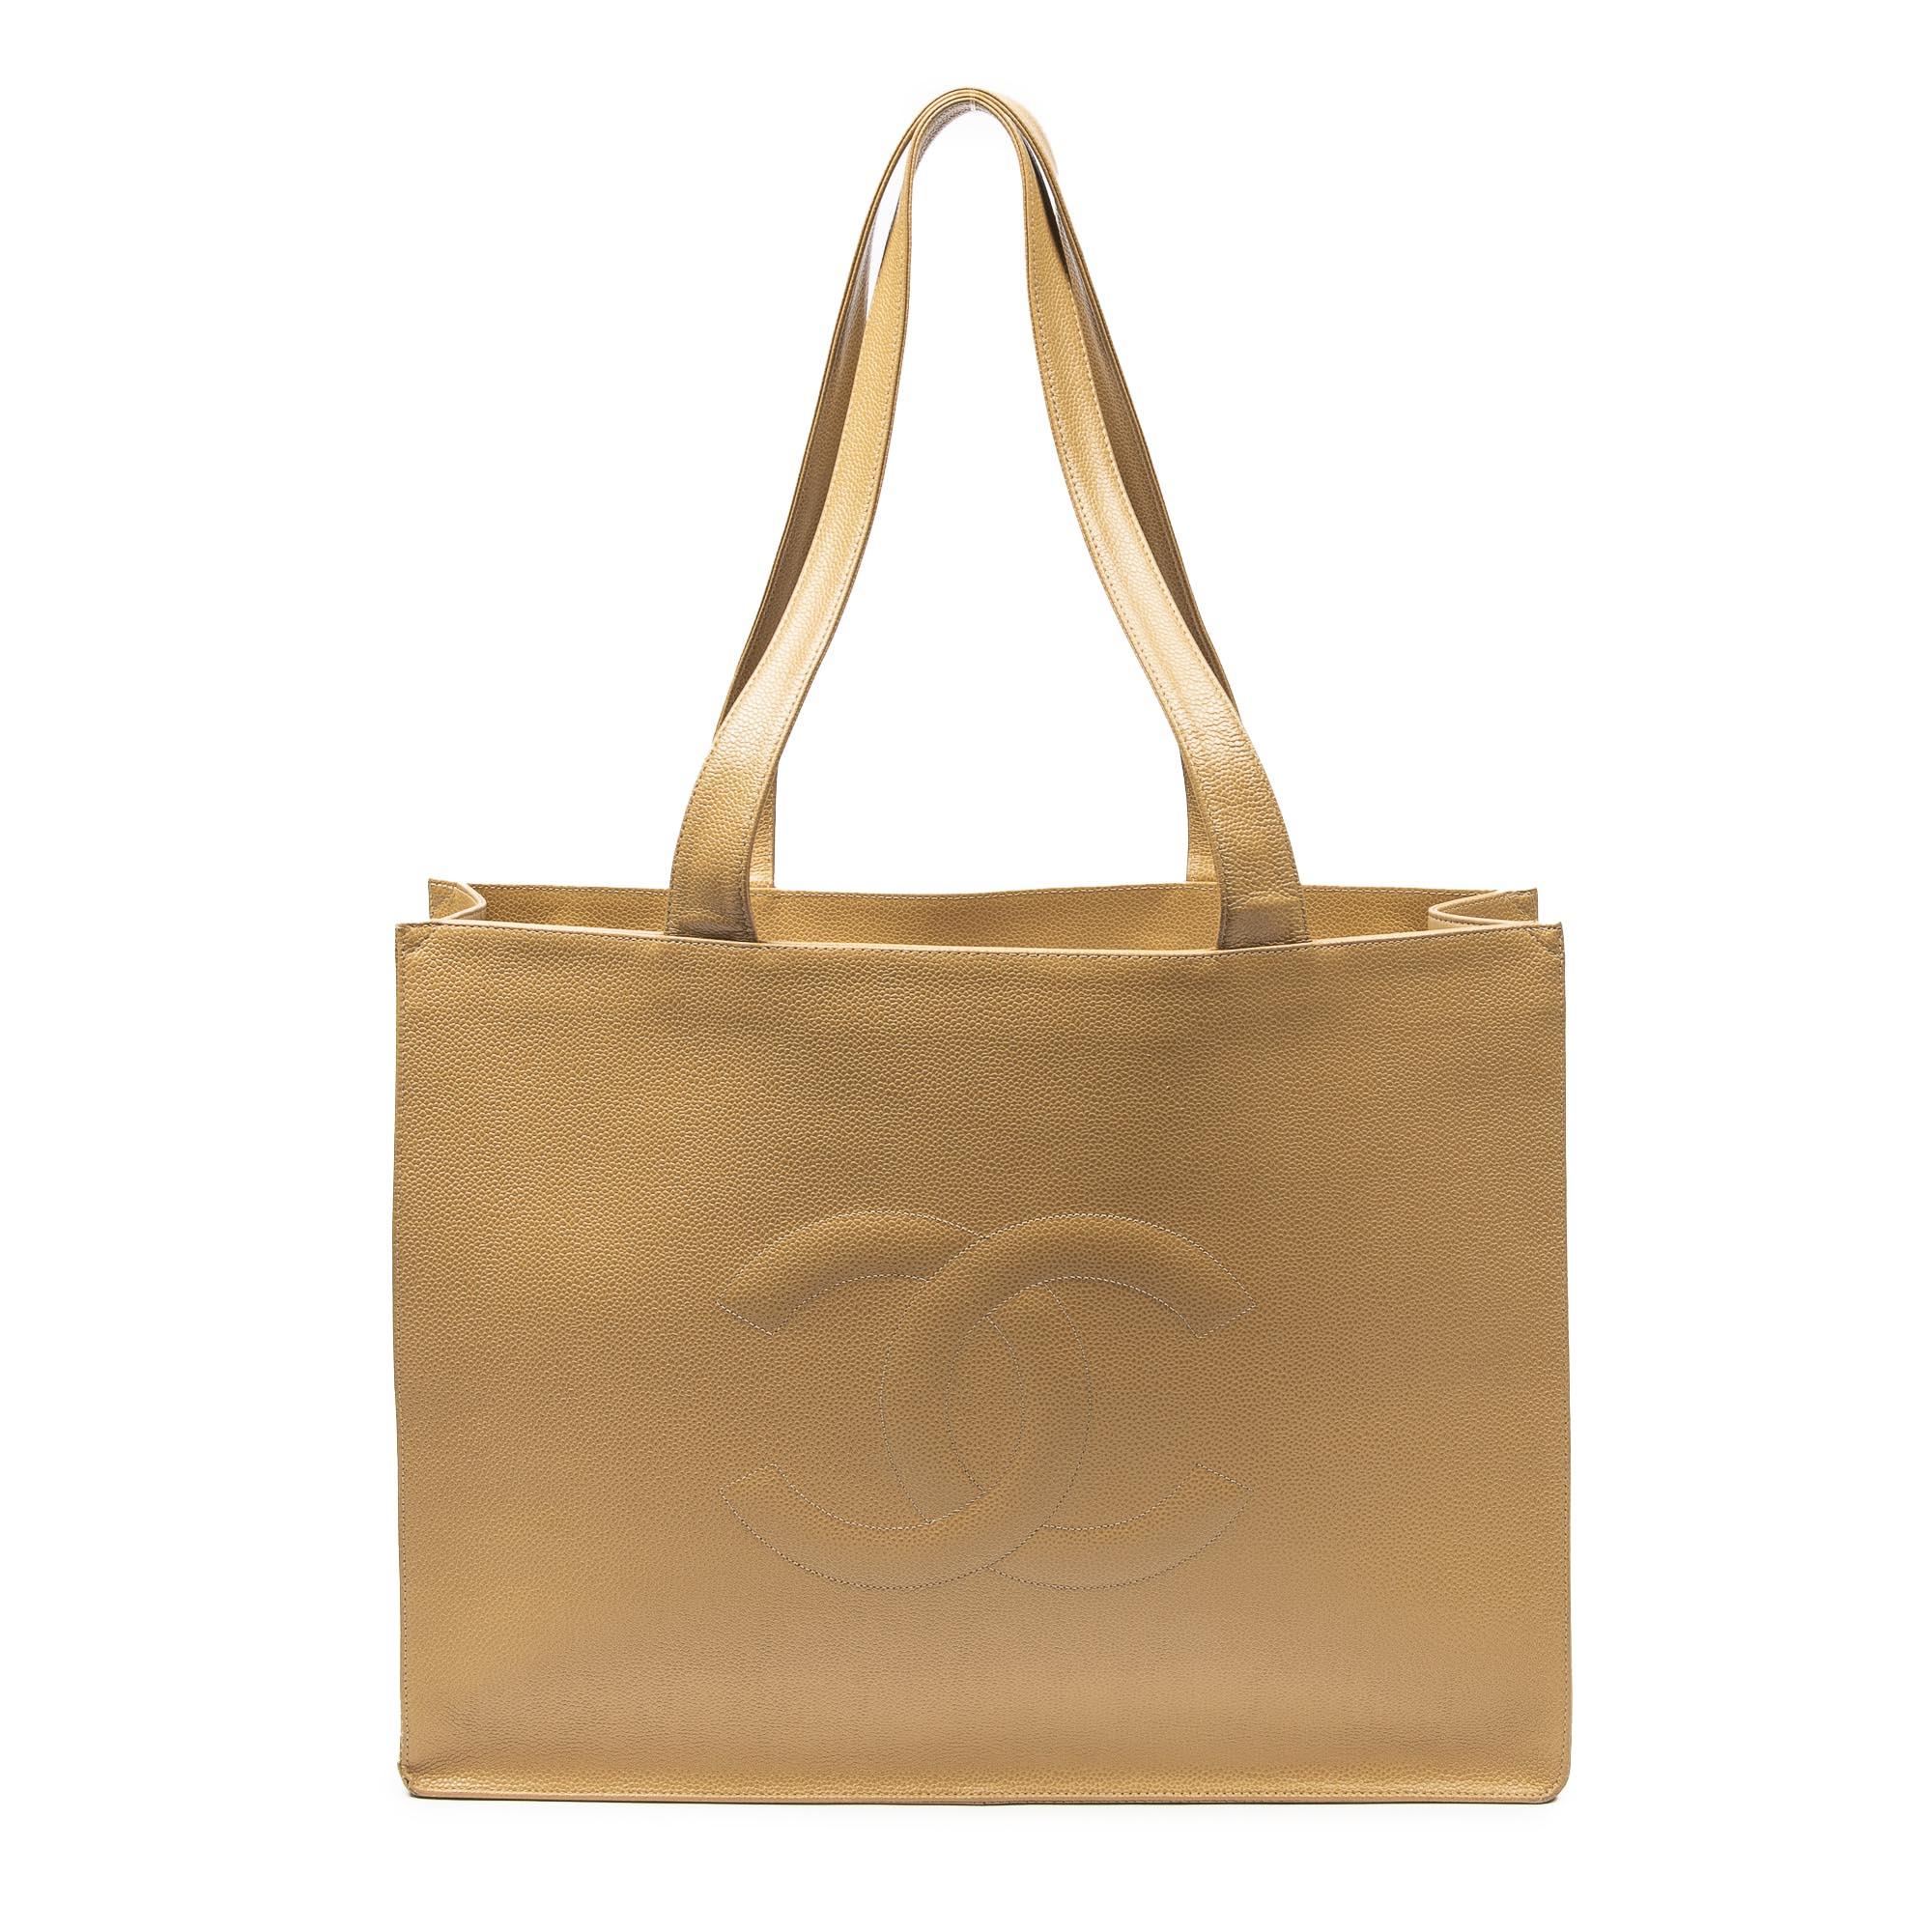 Chanel Cc Timeless Shopping Tote in Natural